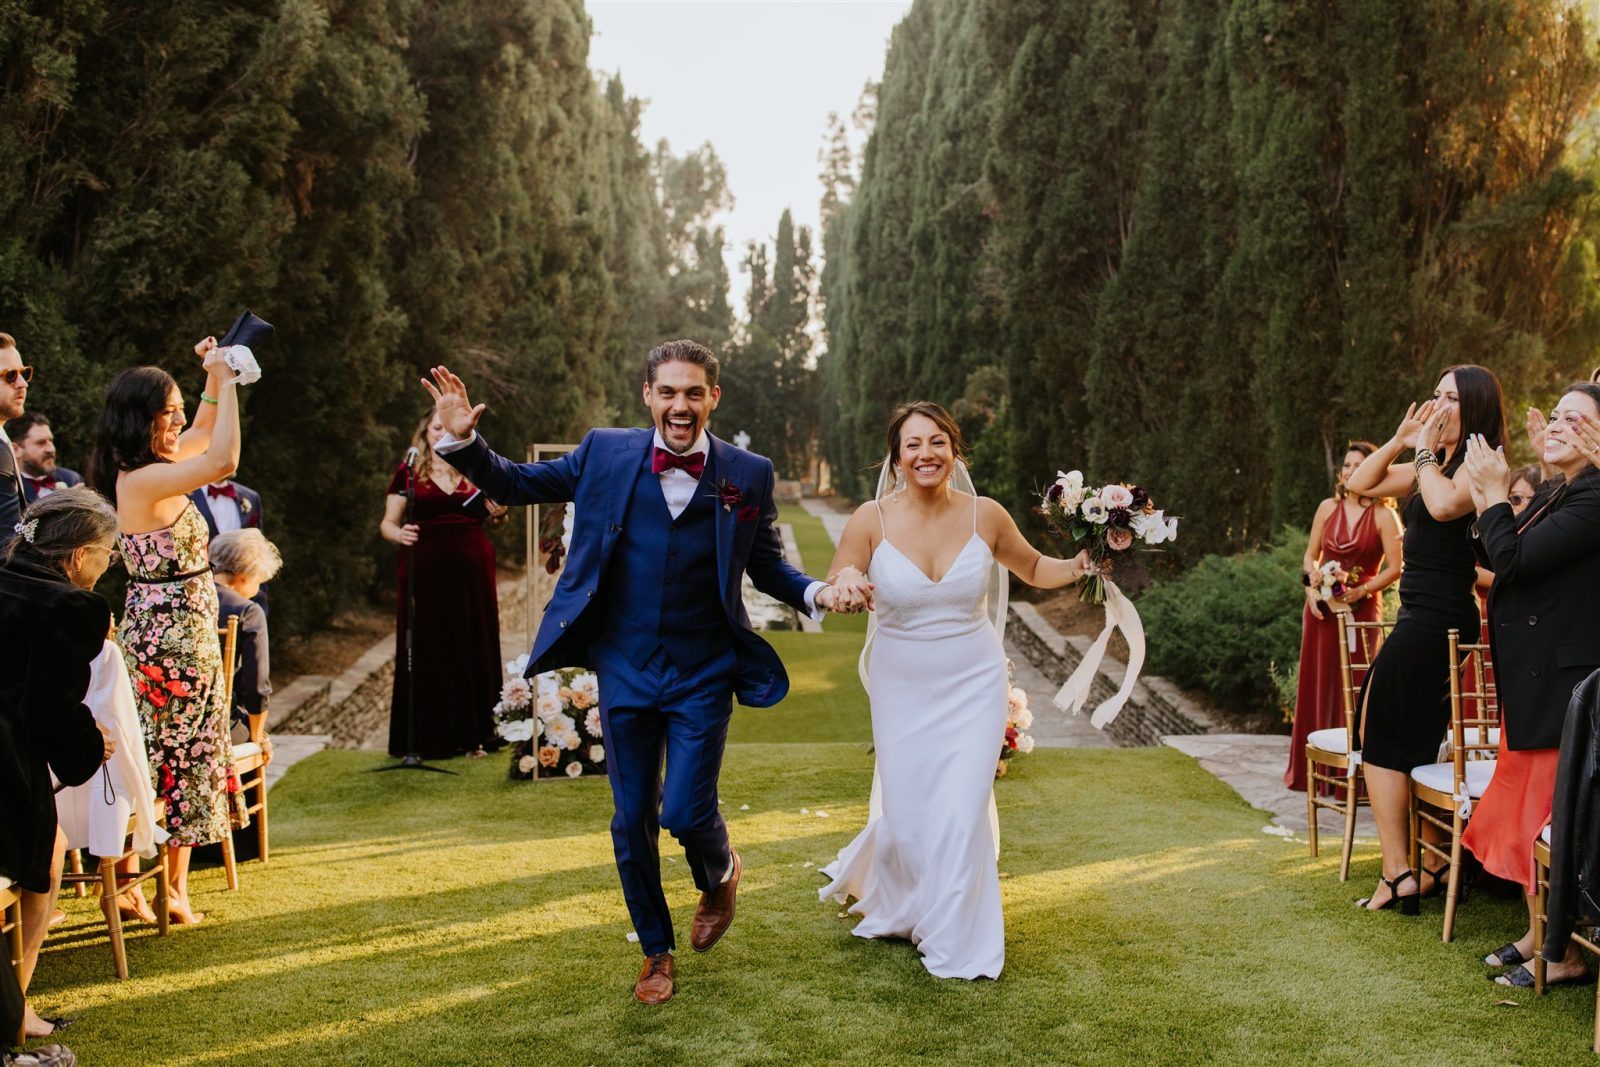 How to Plan a Southern California Elopement